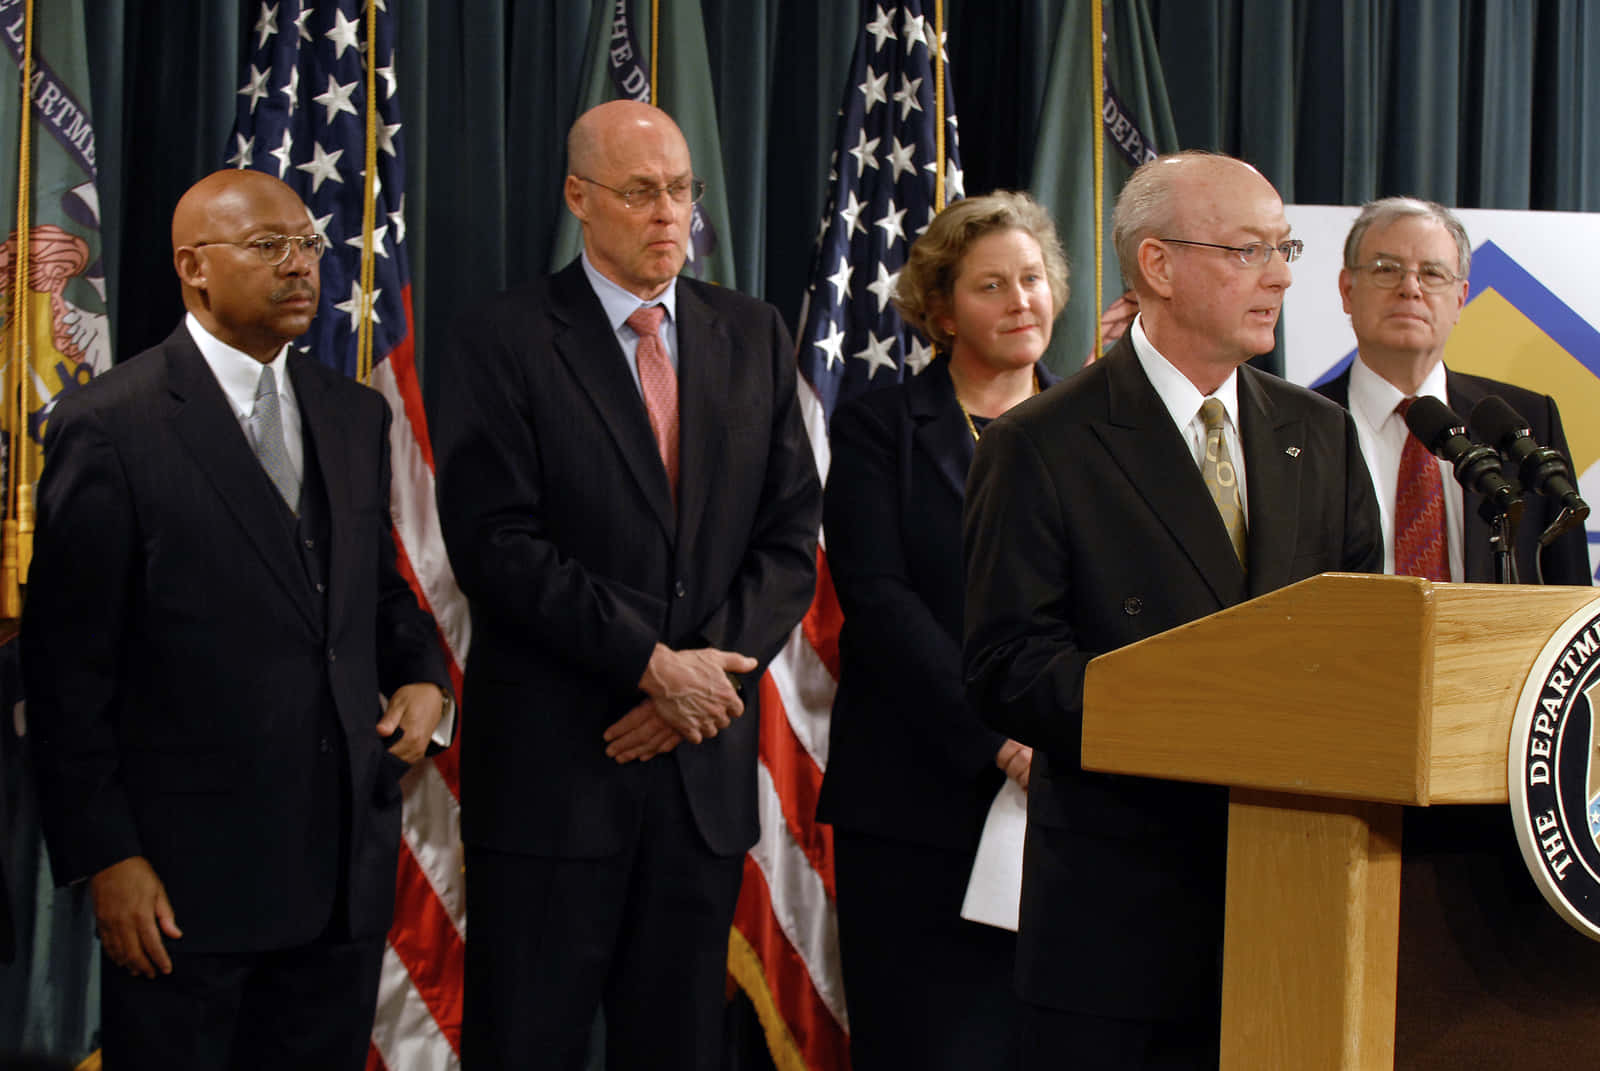 Former United States Secretary of the Treasury, Henry Paulson, meeting with Treasury personnel. Wallpaper